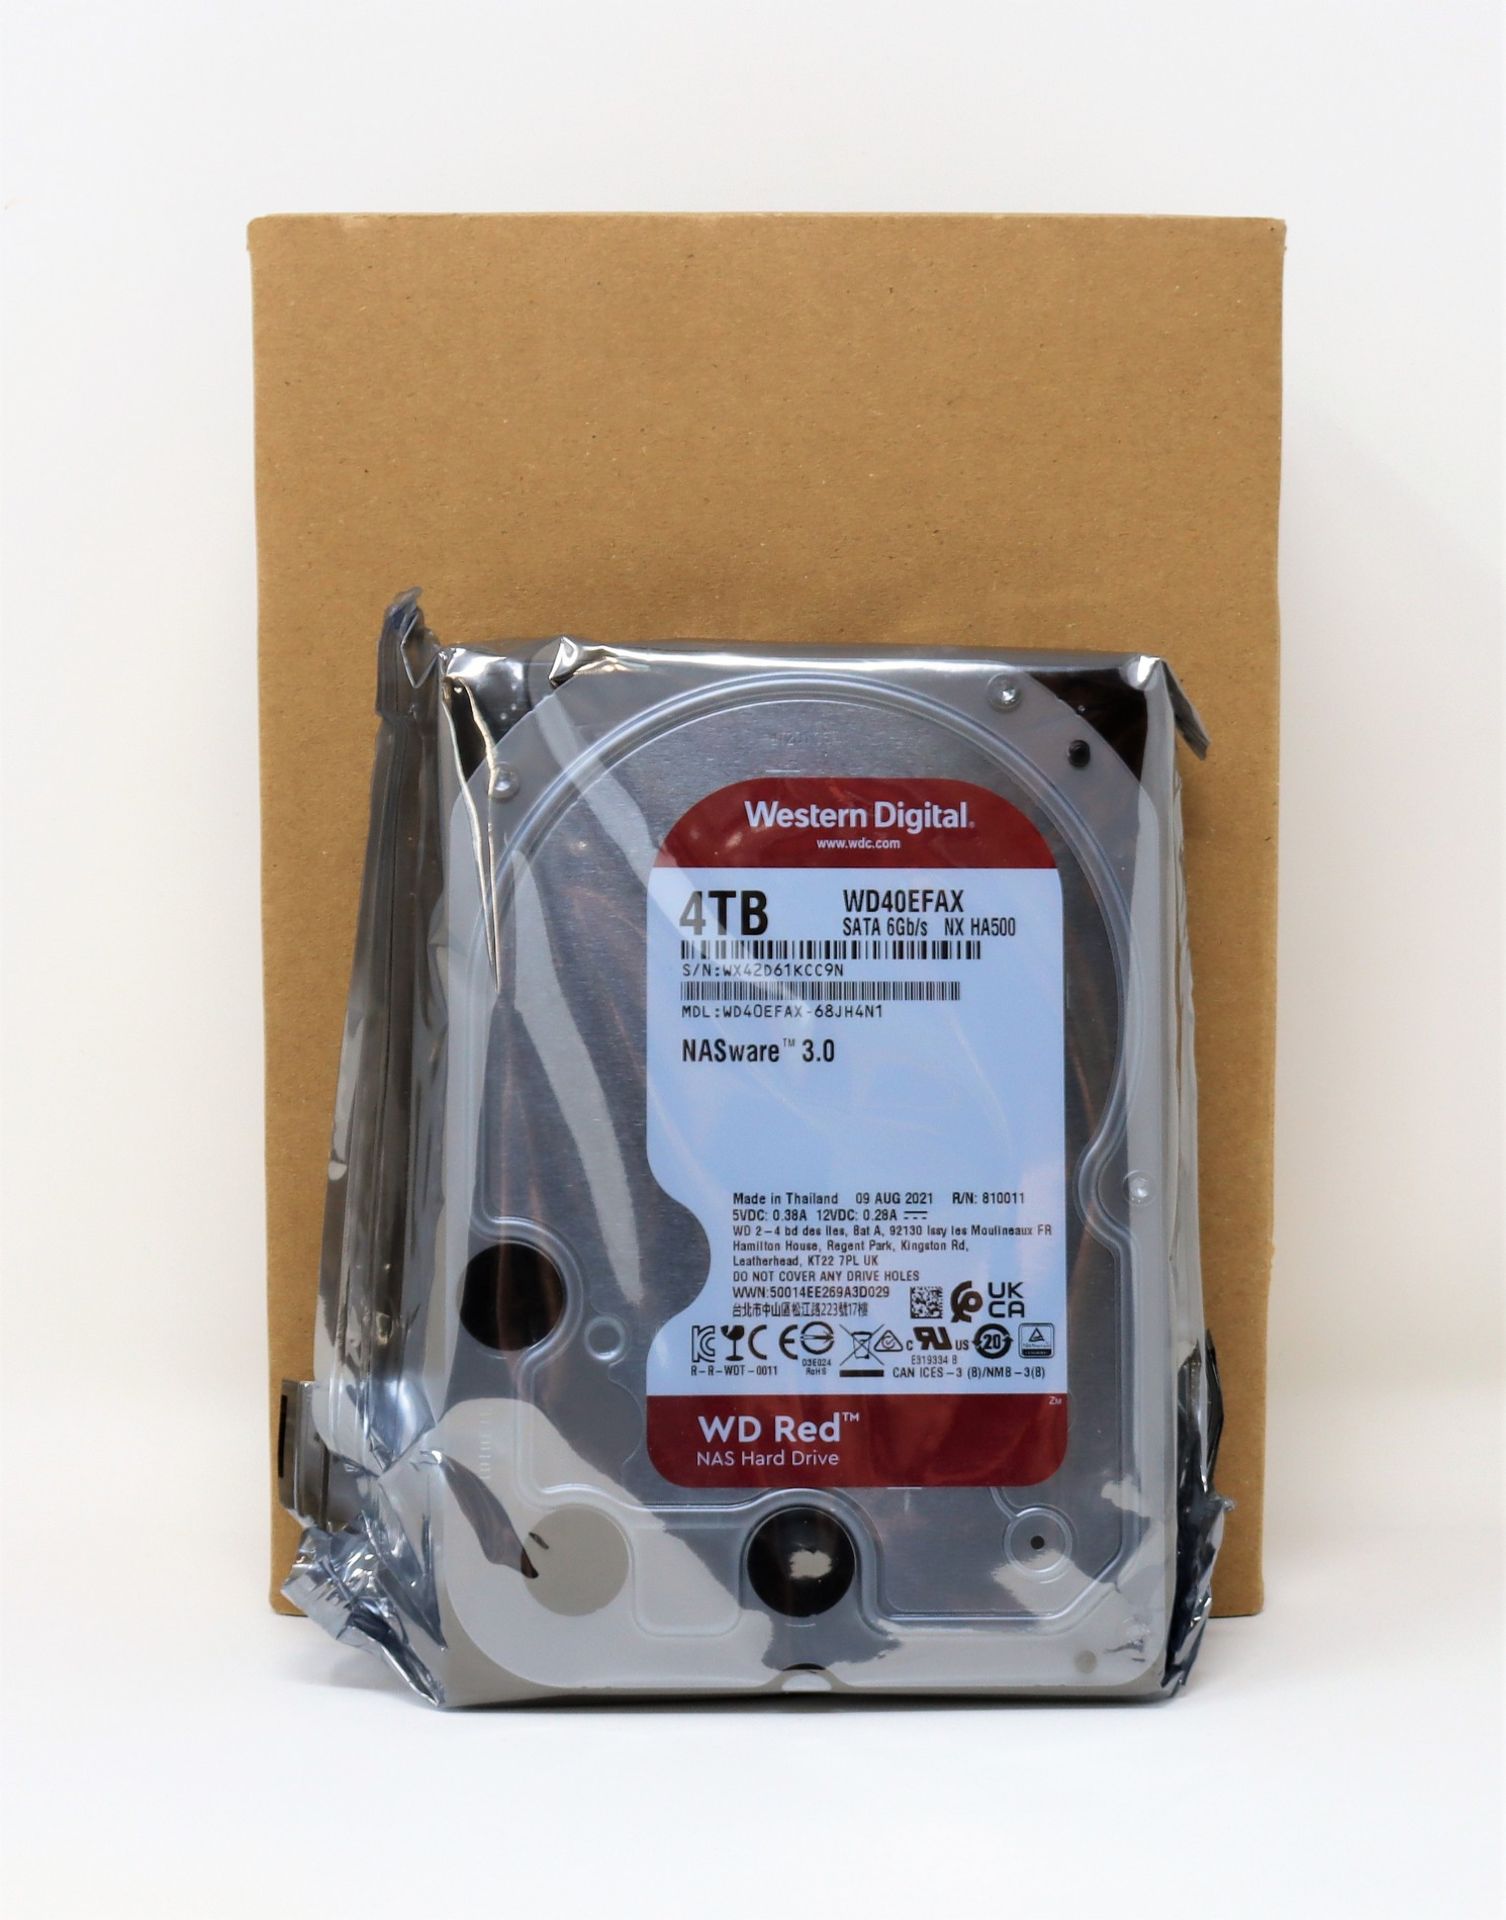 A boxed as new WD Red 4TB 3.5 Inch NAS Internal Hard Drive (P/N: WD40EFAX-68JH4N1) (Packaging